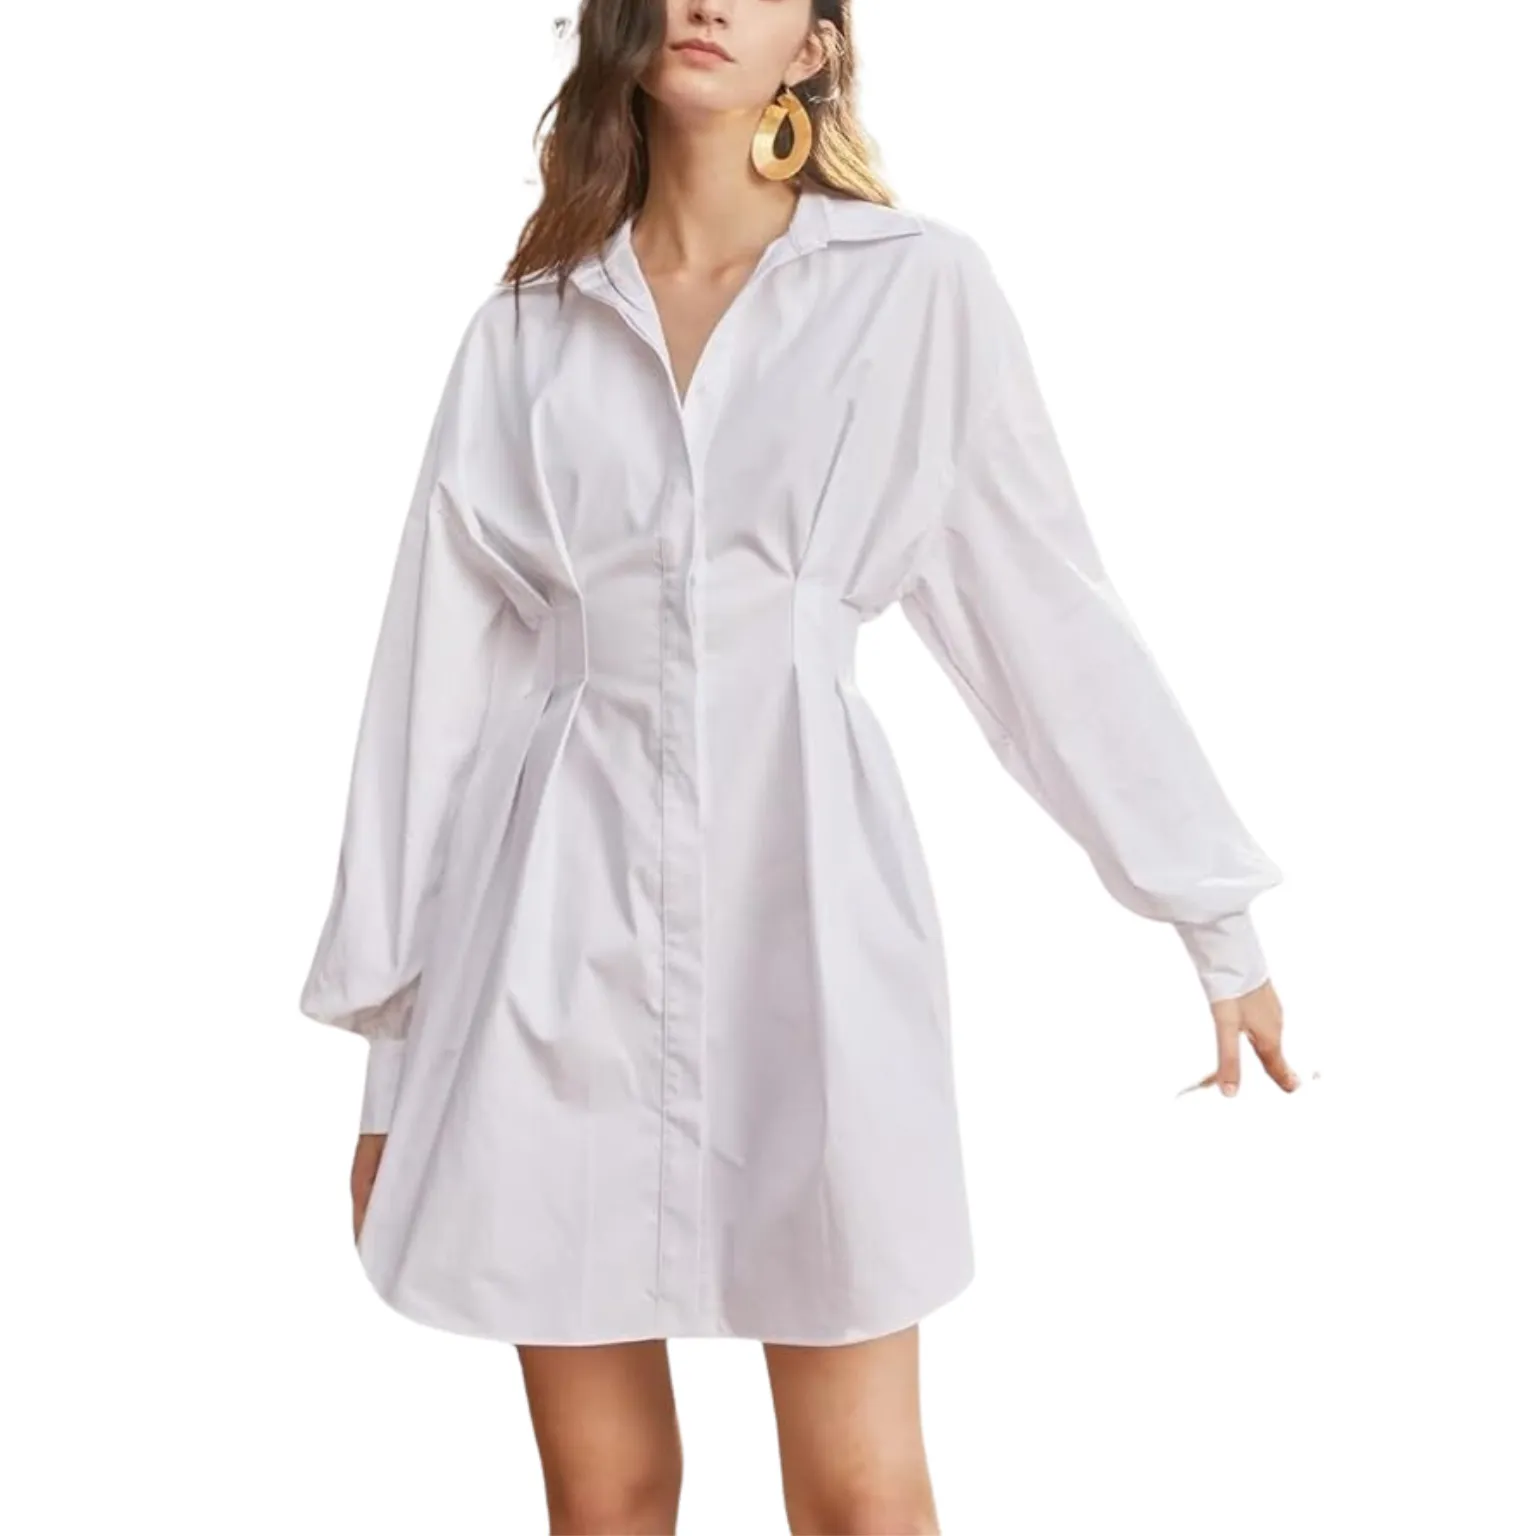 Shirt Dress Manufacturing with superior quality